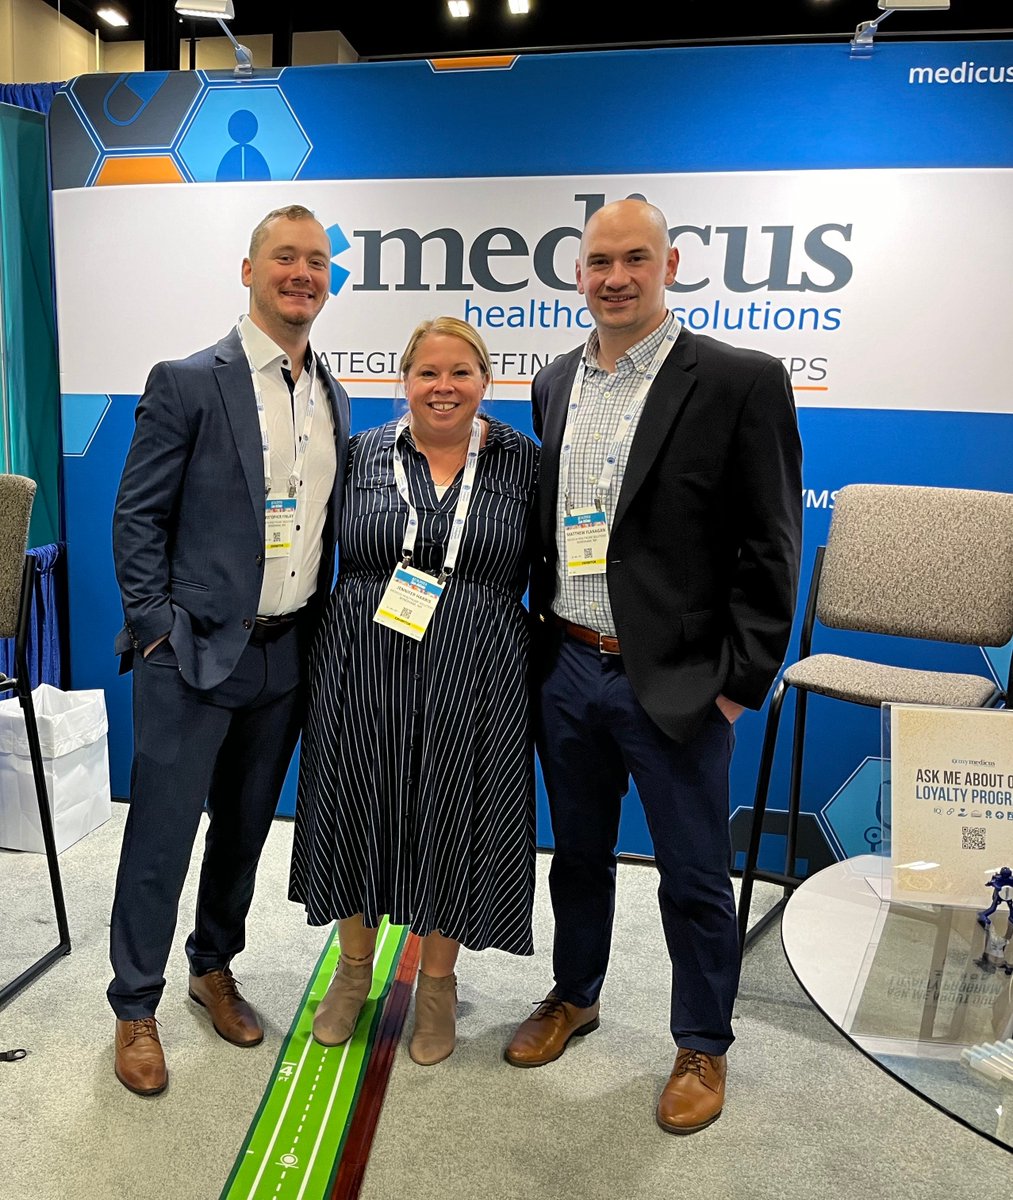 There's no place like Texas! The Medicus team is in San Antonio exhibiting at the American Urological Association (AUA) Annual Meeting! Swing by booth #769 to learn about our #urology opportunities and test your golf skills at our putting green! #AUA24 #Urologists #LocumTenens